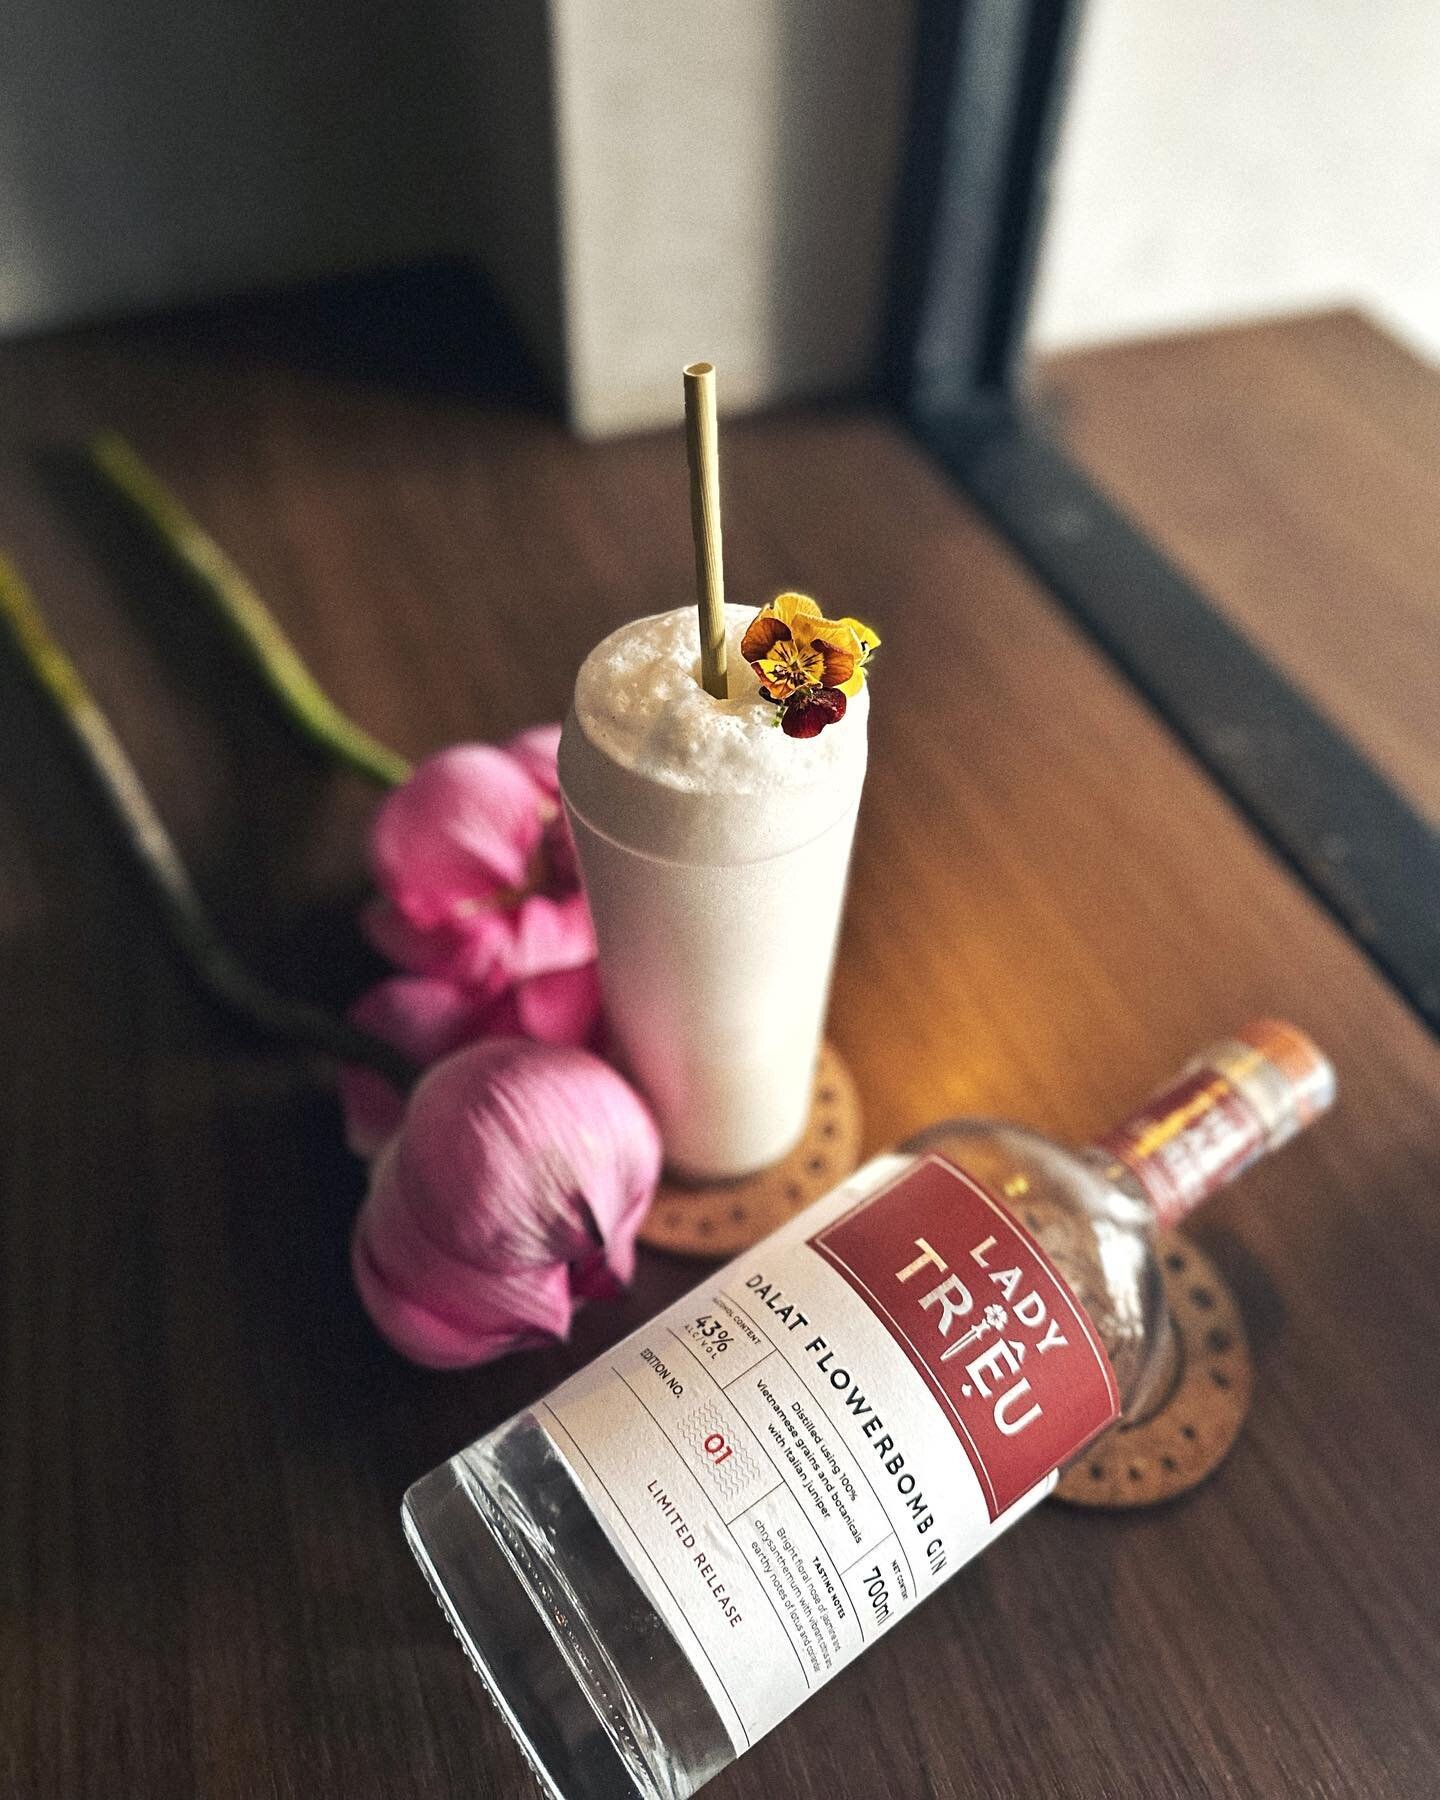 Heading into another long weekend ! We'll be open as usual with some 30/4 cocktails featuring Vietnamese local spirits 🇻🇳

Enjoy 50% off all cocktails during our 𝐝𝐚𝐢𝐥𝐲 𝐡𝐚𝐩𝐩𝐲 𝐡𝐨𝐮𝐫 from 4pm to 7pm.

&mdash;&mdash;

𝟖𝟔 𝐏𝐑𝐎𝐎𝐅 𝐖𝐇?